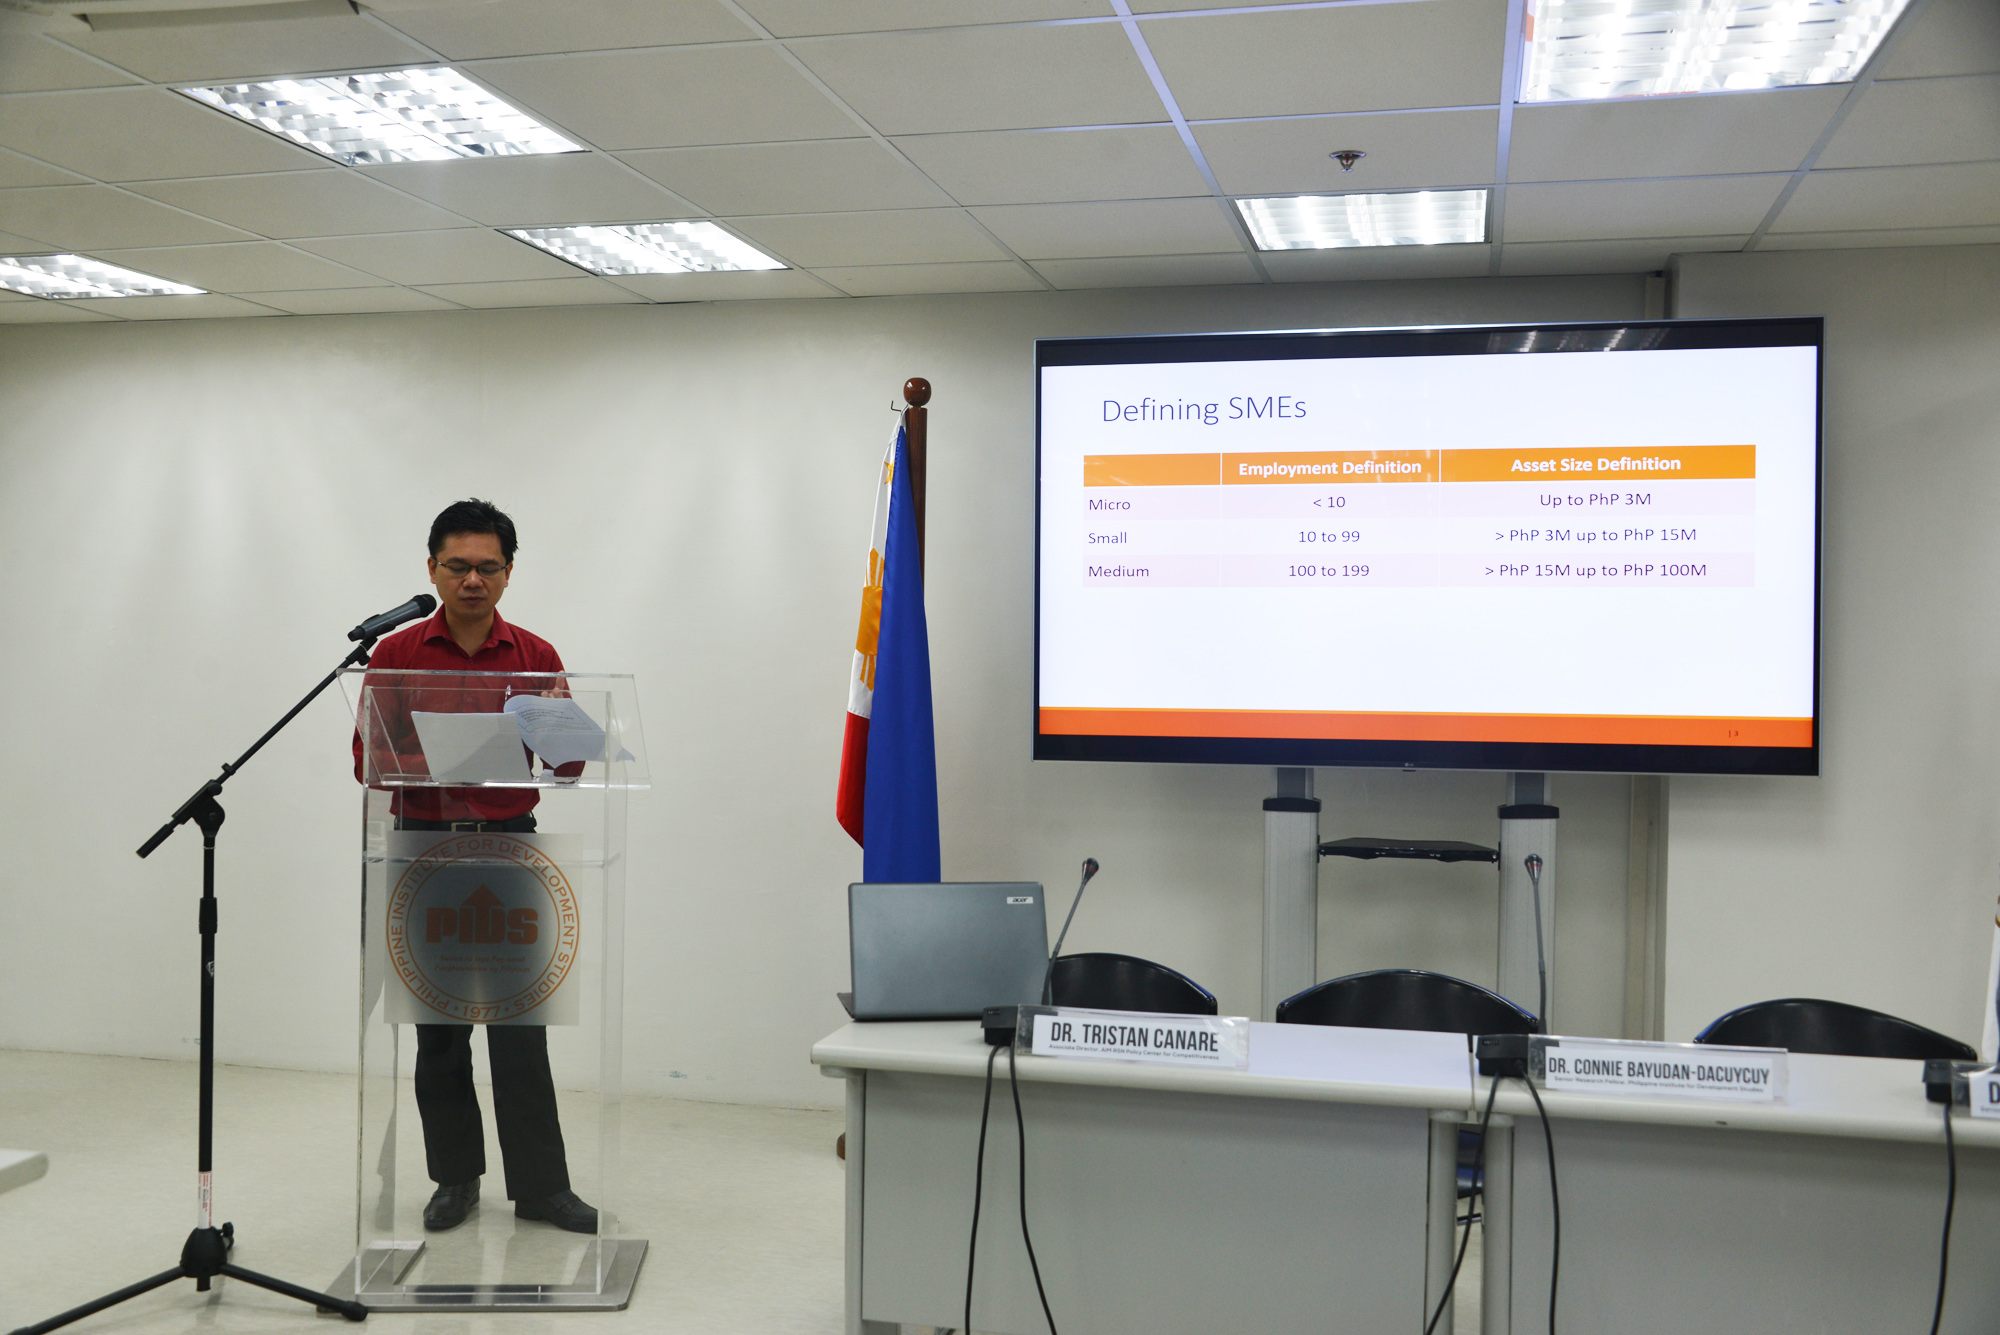 Public Seminar on Global Trade and SMEs-pids-tradesmes-16-20191016.jpg